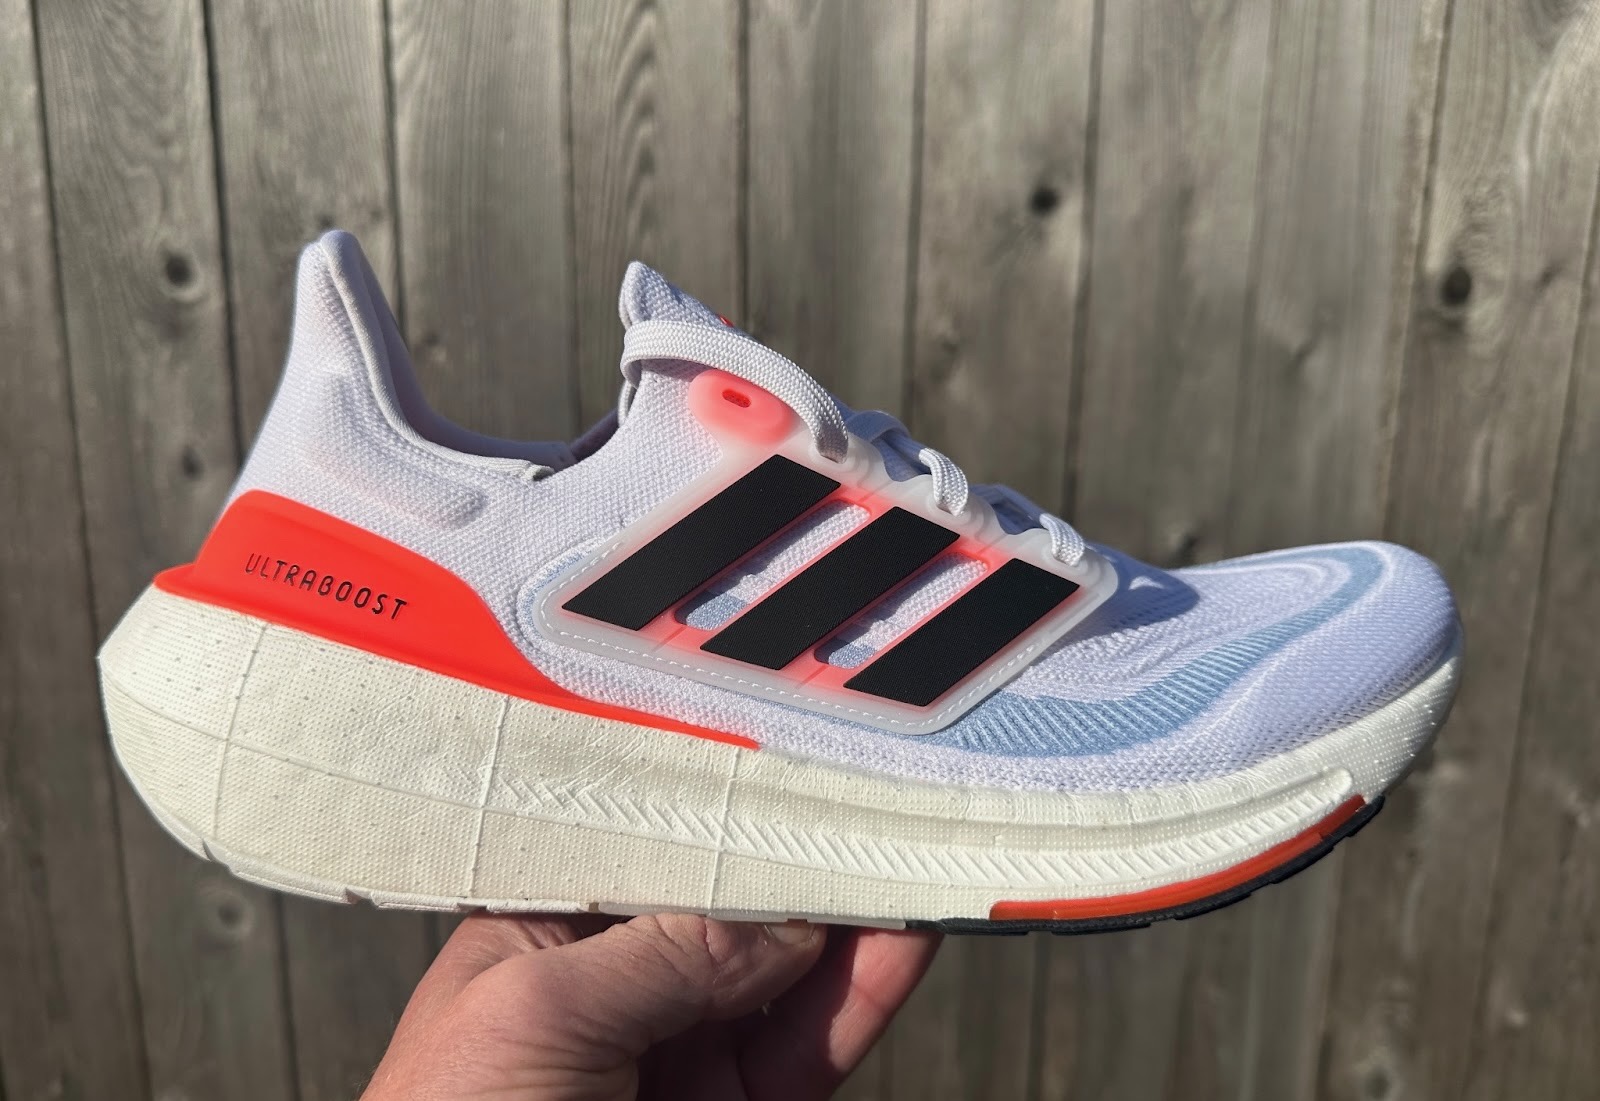 A Better Look at the Rumored Adidas Ultra Boost 2020